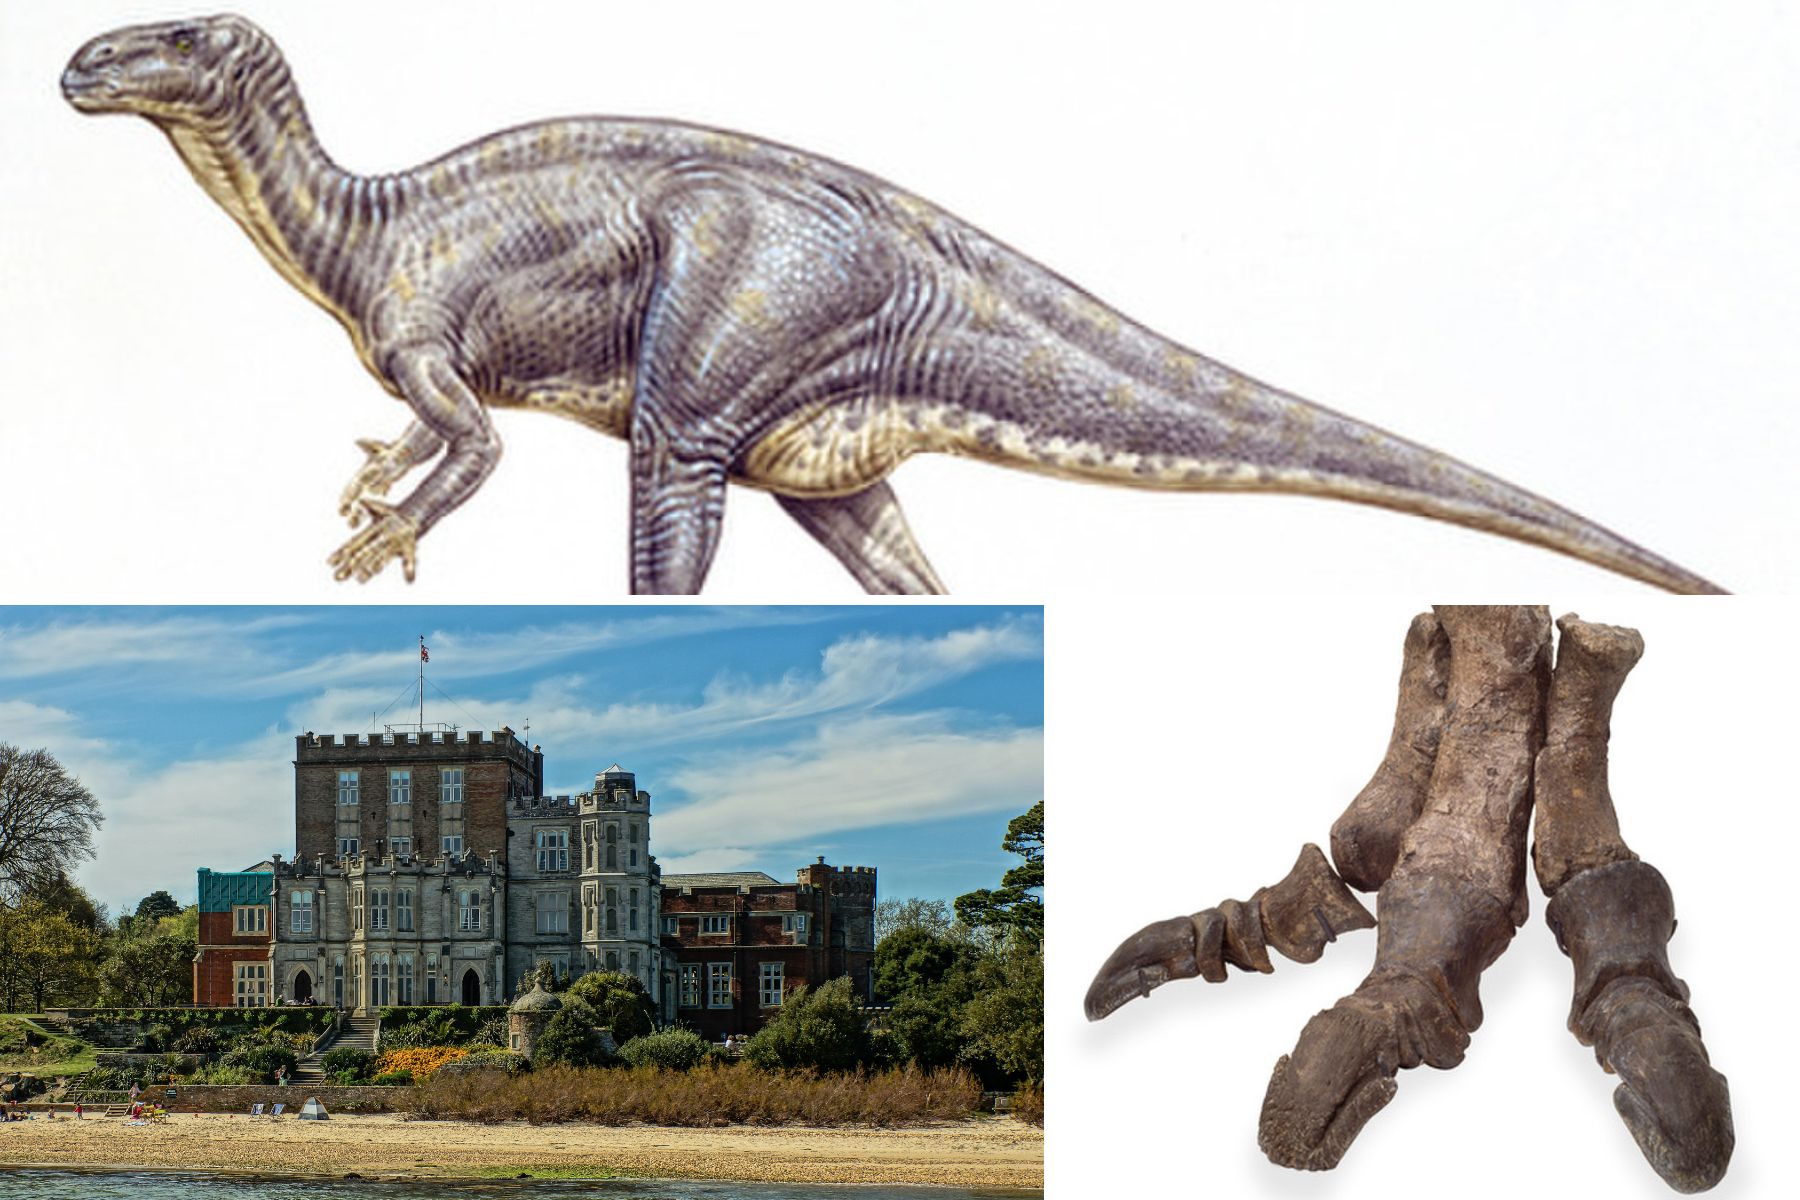 The footprint is suspected to be that of an Iguanodon, found in the grounds of Brownsea Castle. Pictures: Iain A Wanless/Natural History Museum